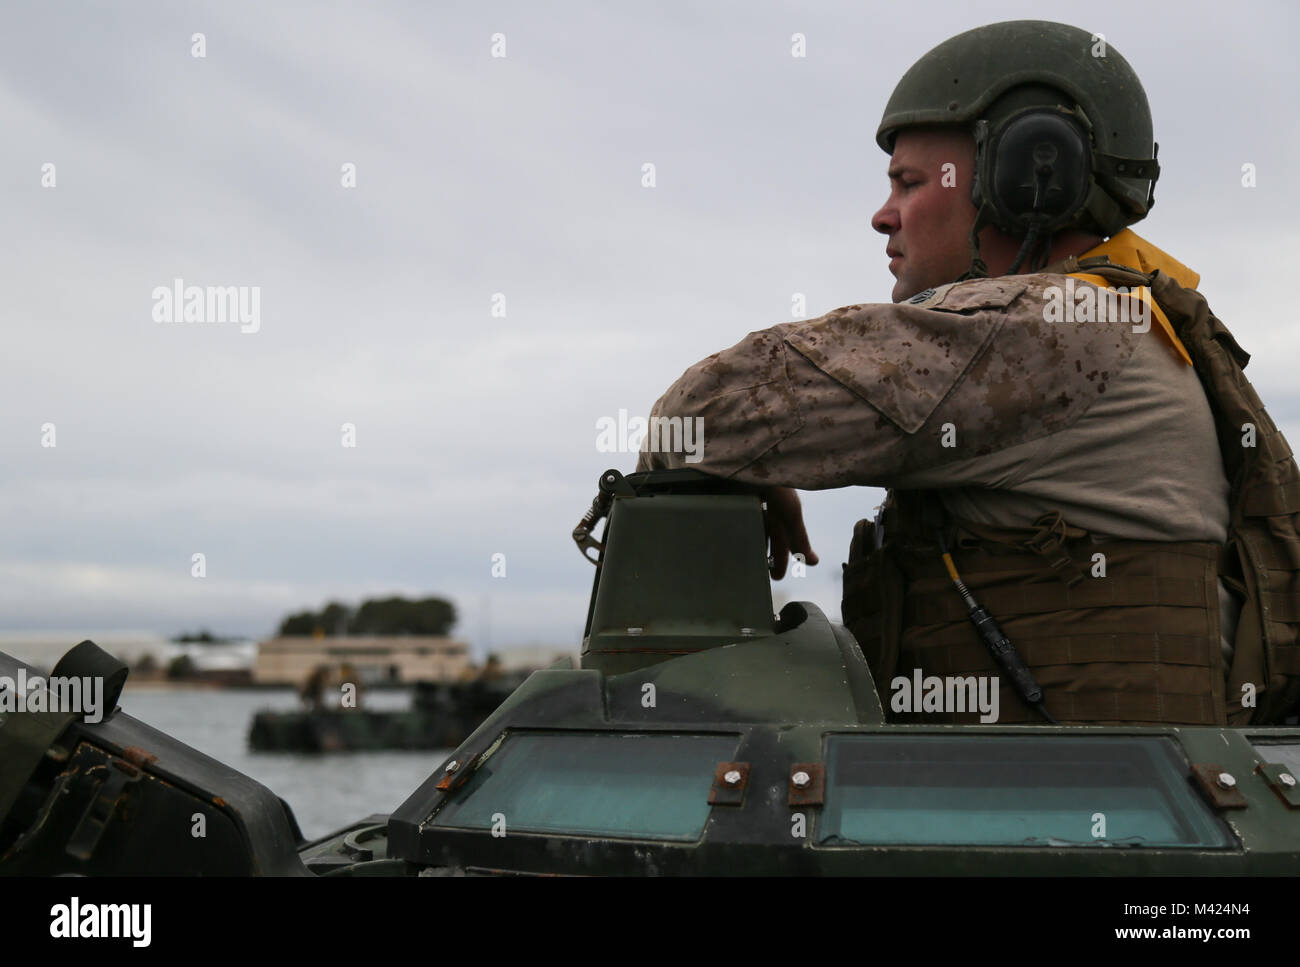 180210-N-IP671-130 NORFOLK, Va., (Feb. 10, 2018) -- Staff Sgt. Daniel Porter observes a training exercise from the top of an Amphibious Assault Vehicle at Joint Expeditionary Base Little Creek.  This exercise is held every six months to keep the Marines ready for water recovery scenarios. The 4th Marine Division provides combat support personnel to augment the active duty component in time or war or during a national emergency.  (U.S. Navy photo by Mass Communication Specialist 1st Class Jennifer Wilson/Released) Stock Photo